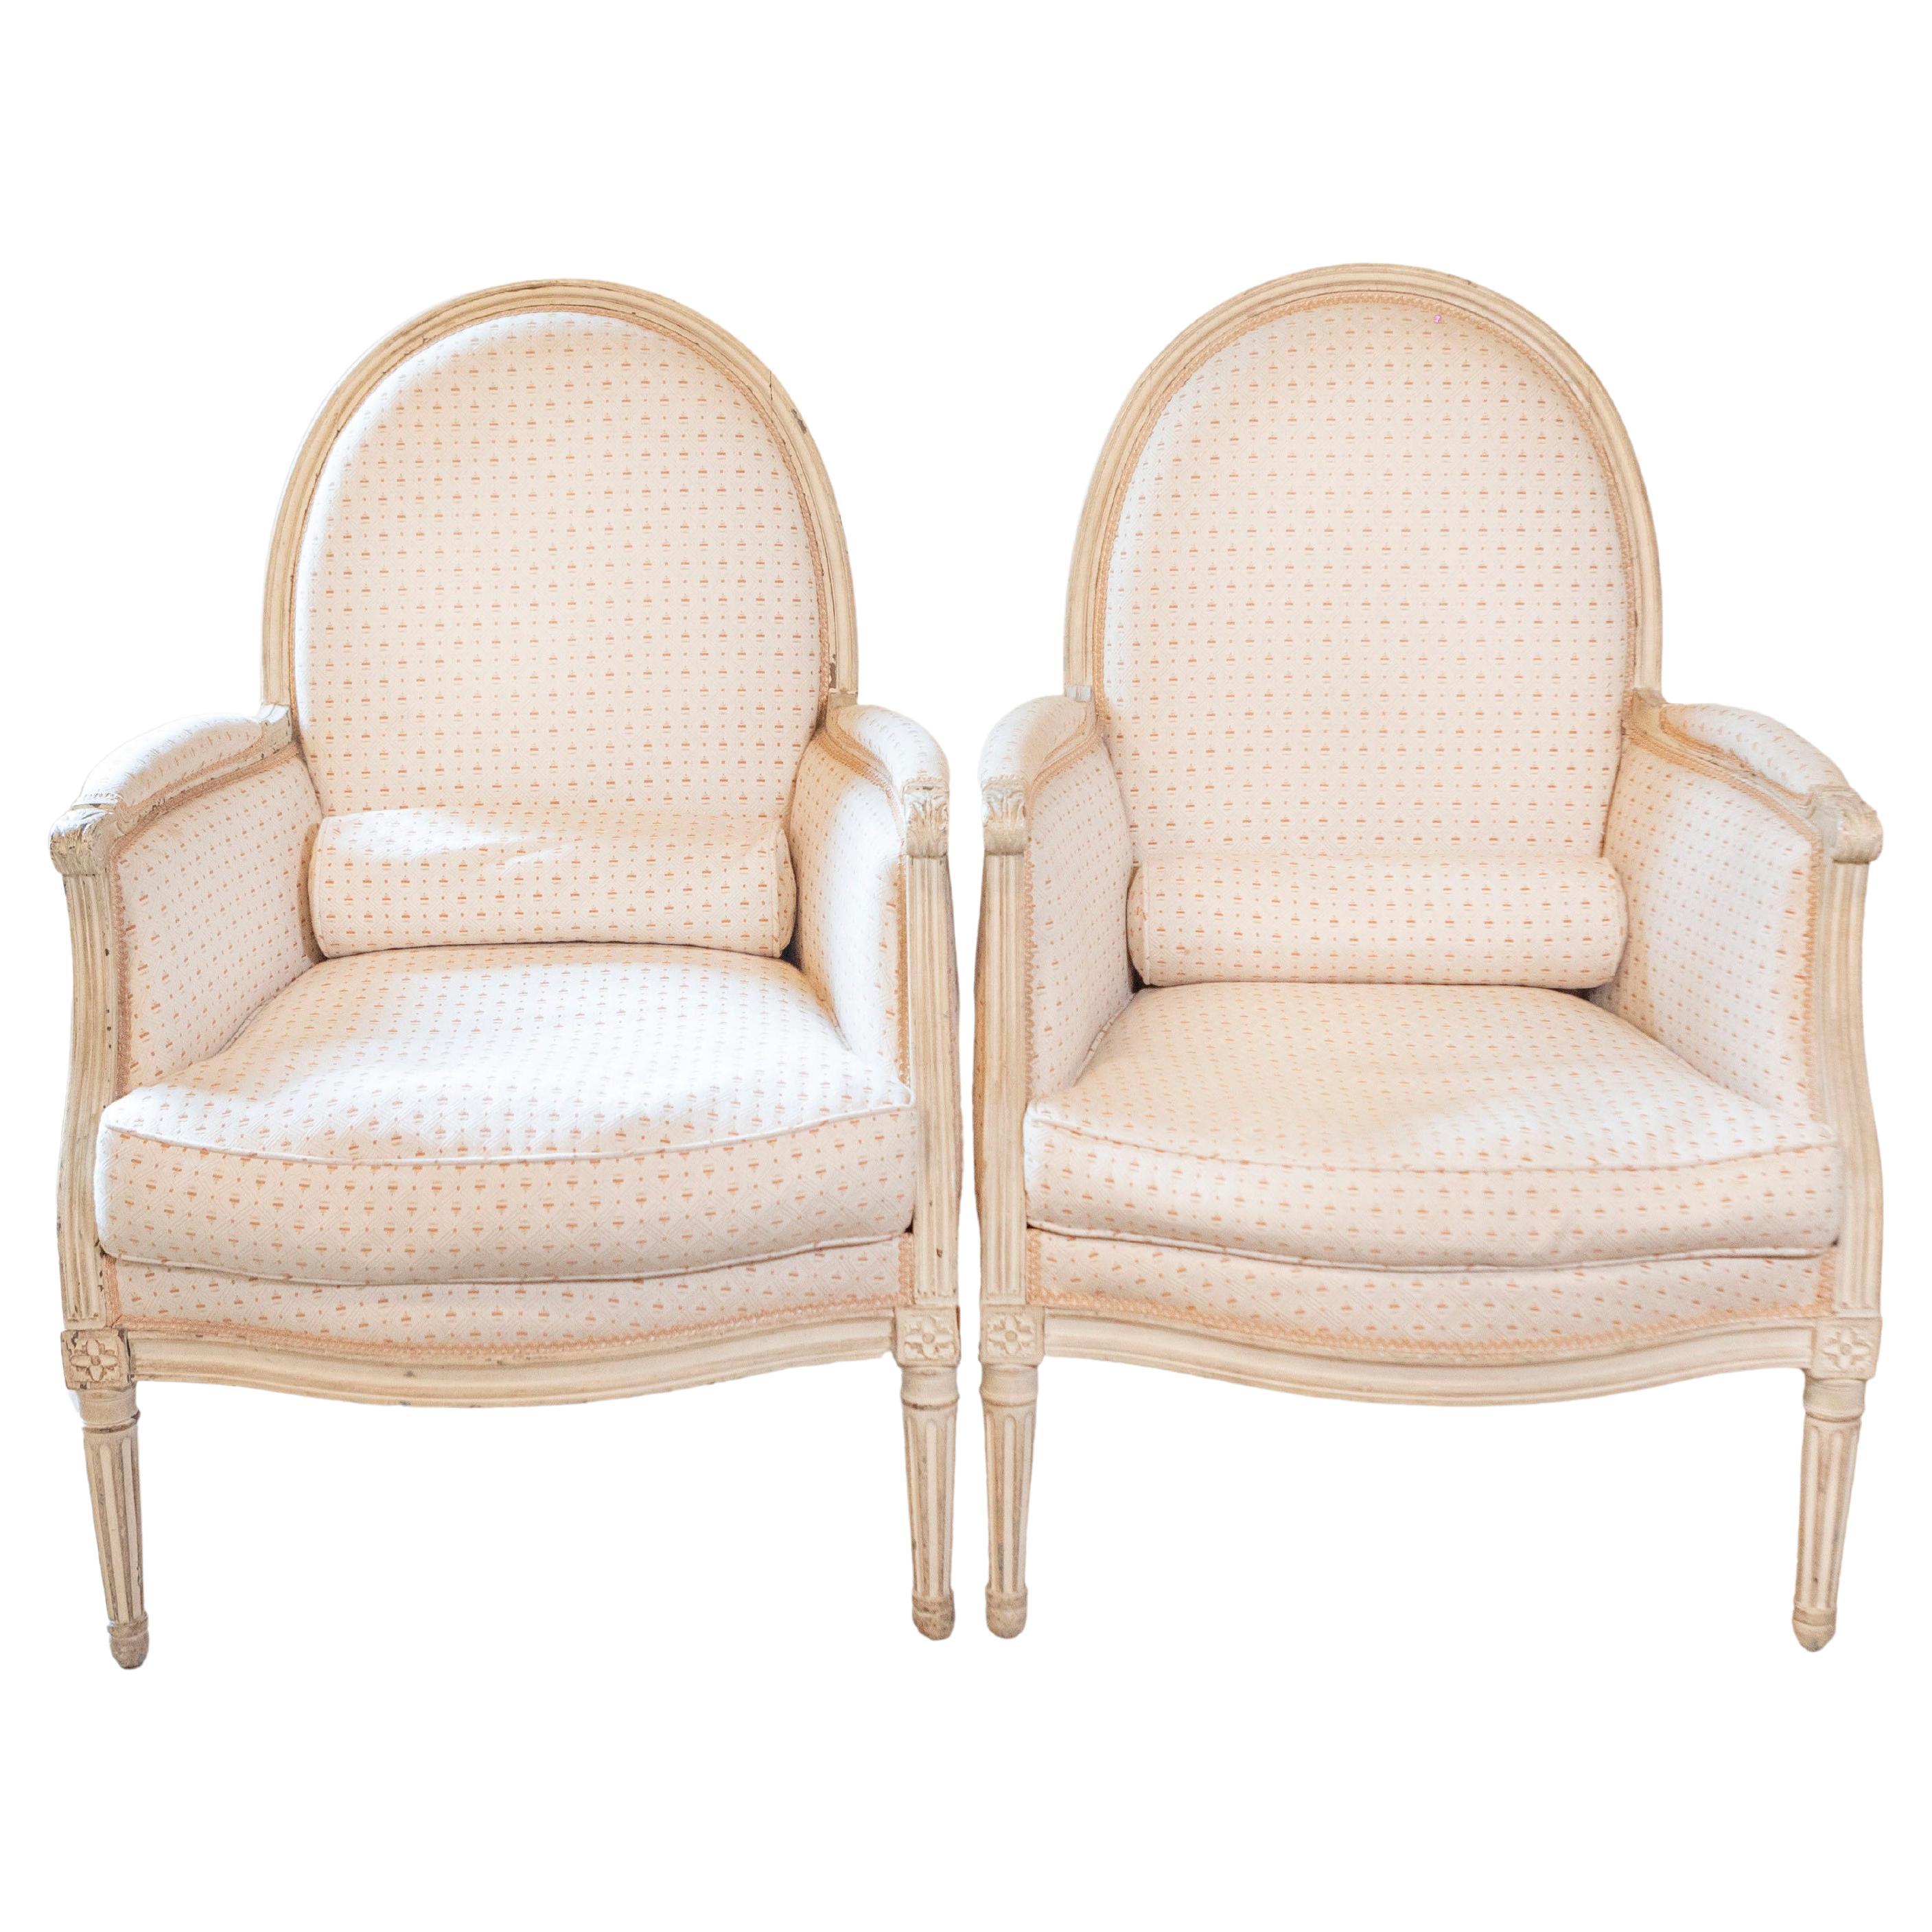 Pair of French Louis XVI Style Painted Bergères Chairs with Oval Shaped Backs For Sale